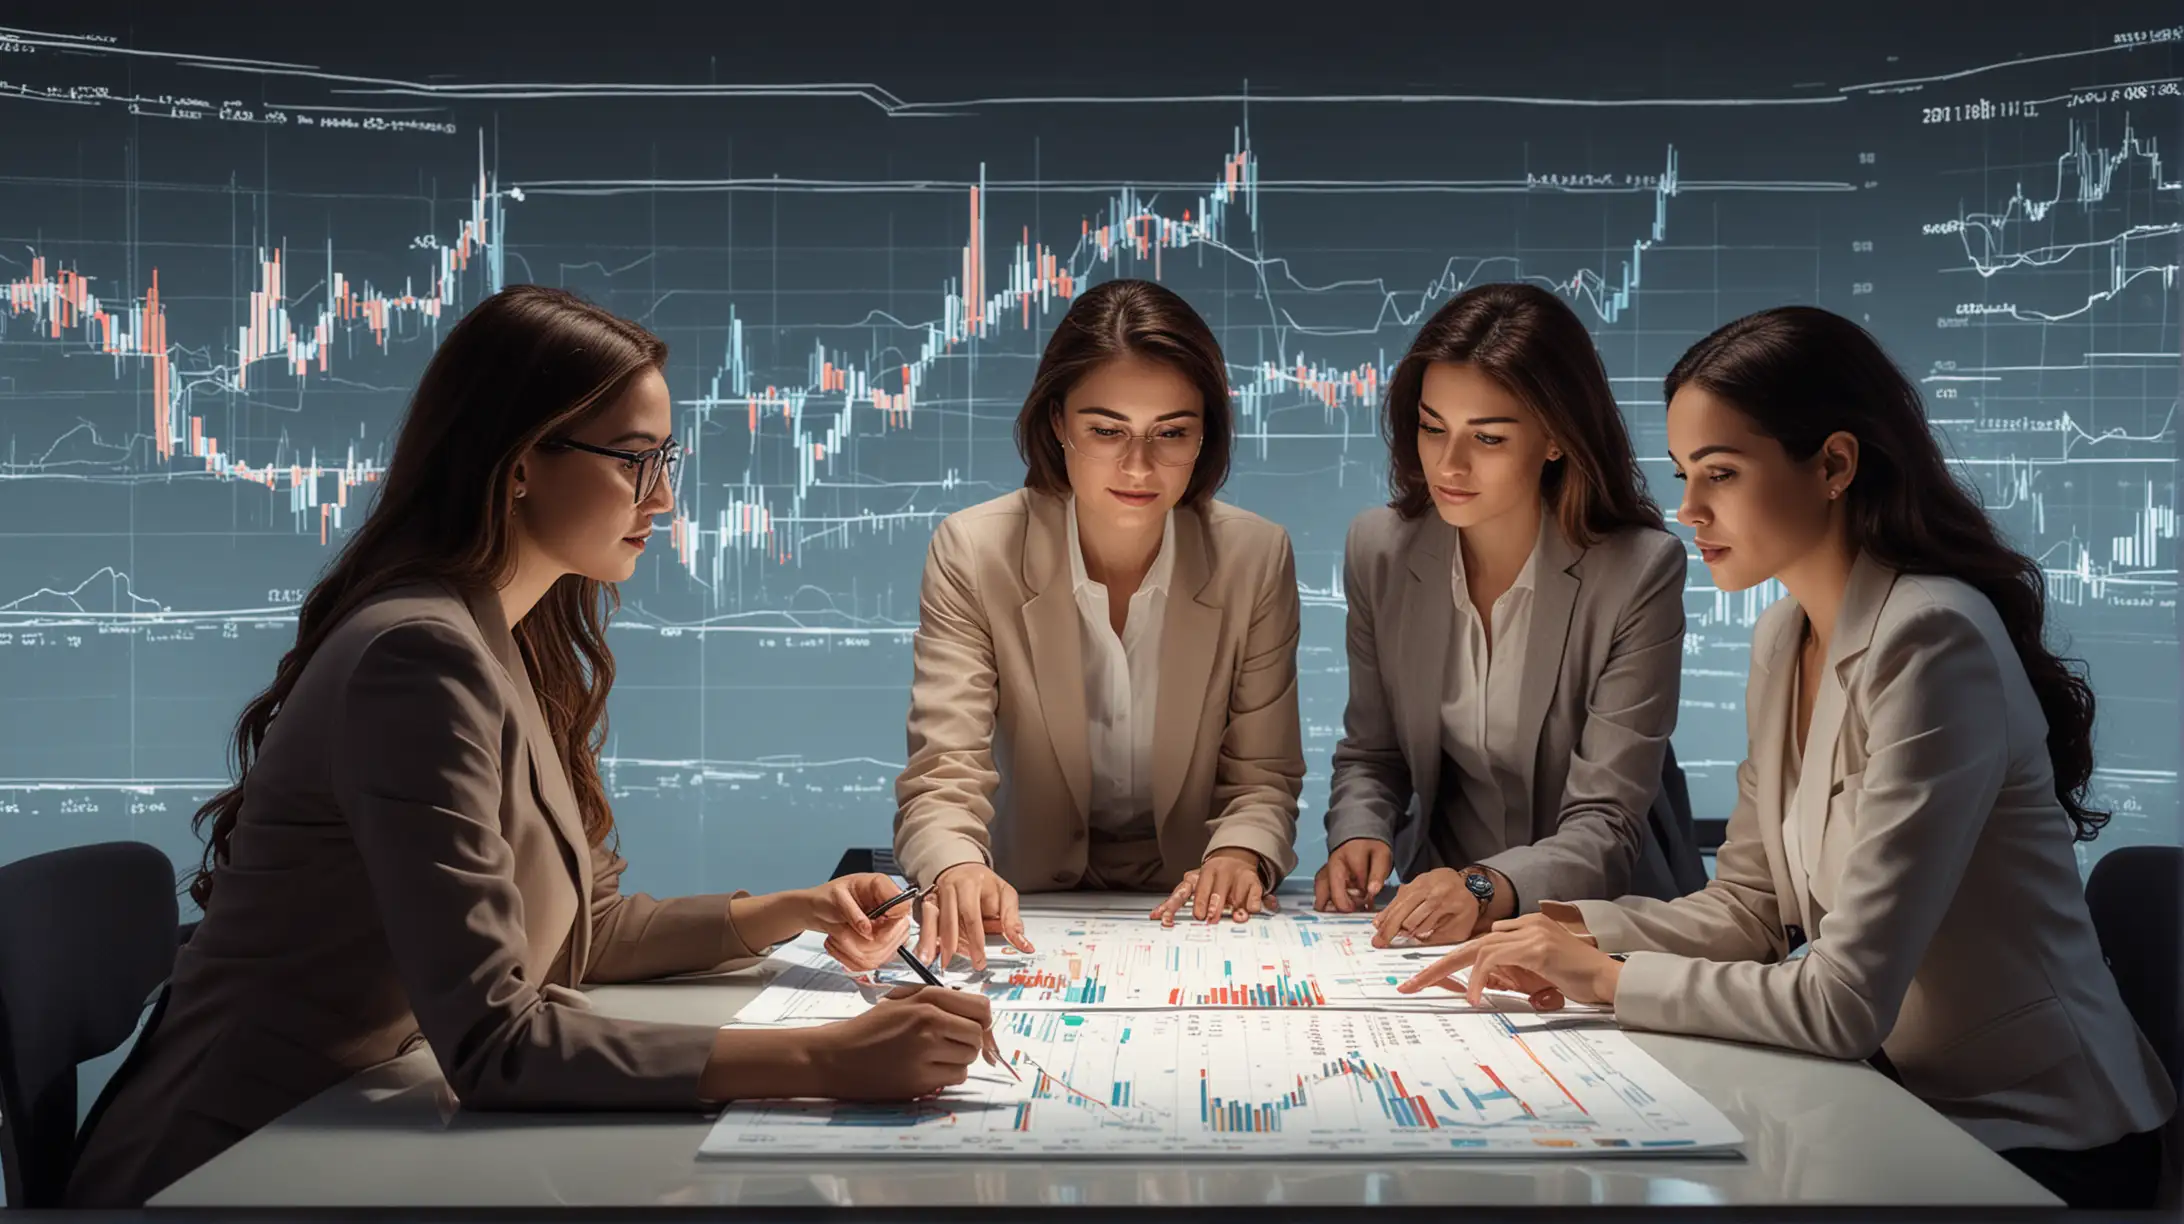 A digital illustration for a financial blog, depicting a diverse group of investors—two women and one man. They are gathered around a modern, high-tech digital table displaying dynamic line charts and financial data. The setting is professional yet inviting, with soft lighting and a clean, minimalist design. The illustration conveys a sense of collaboration and inclusion, appealing to a broad audience. This image can serve as a central visual focus in the blog post, placed near the introduction to immediately engage readers.